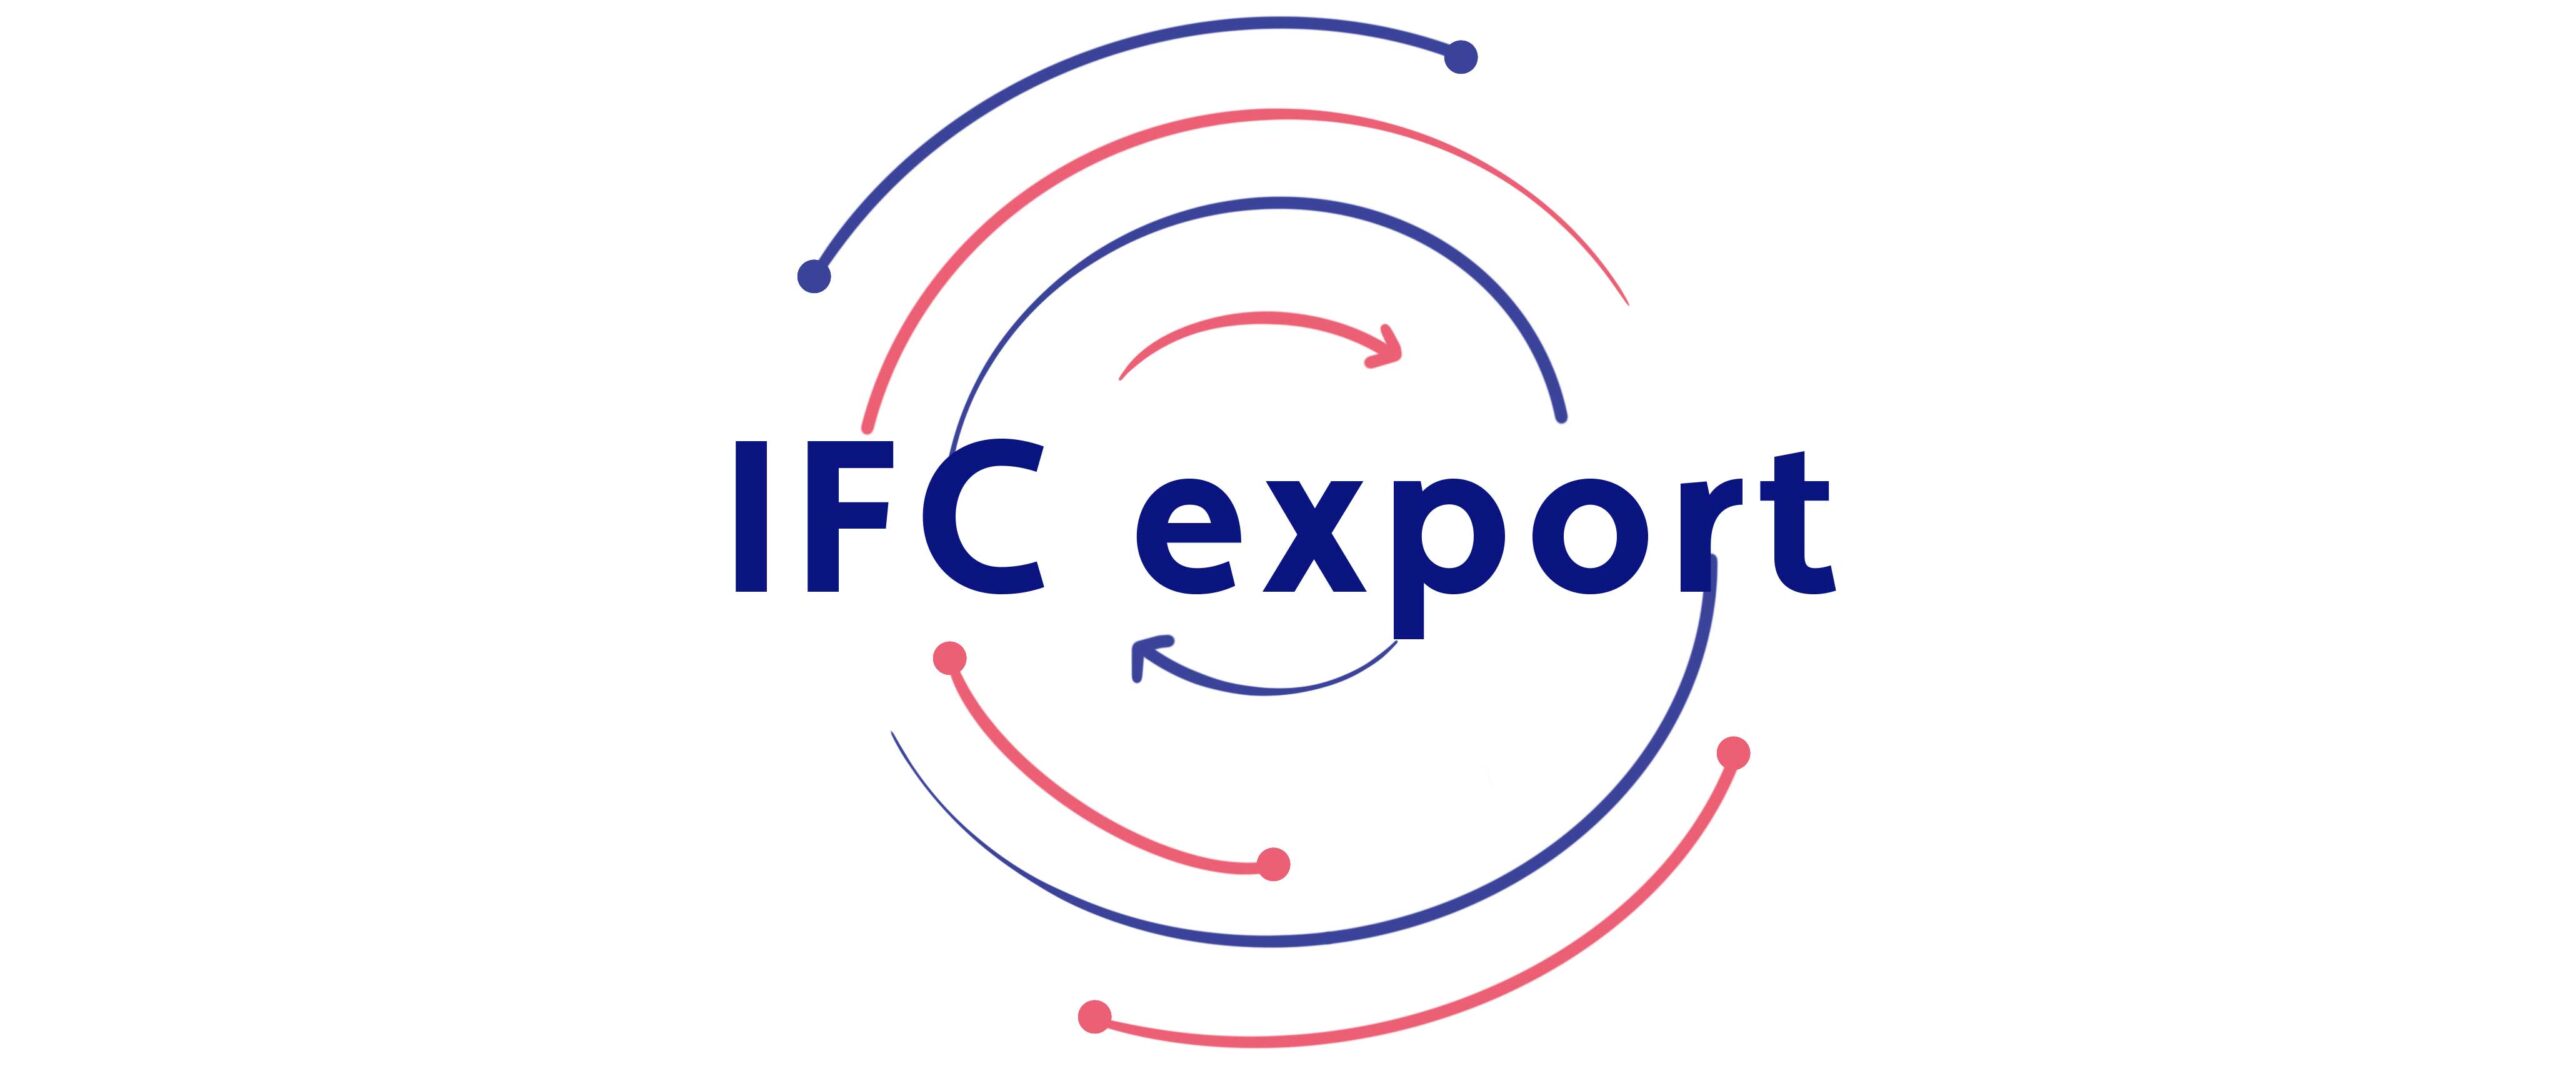 Catenda Logo with 'IFC export' as text in the middle